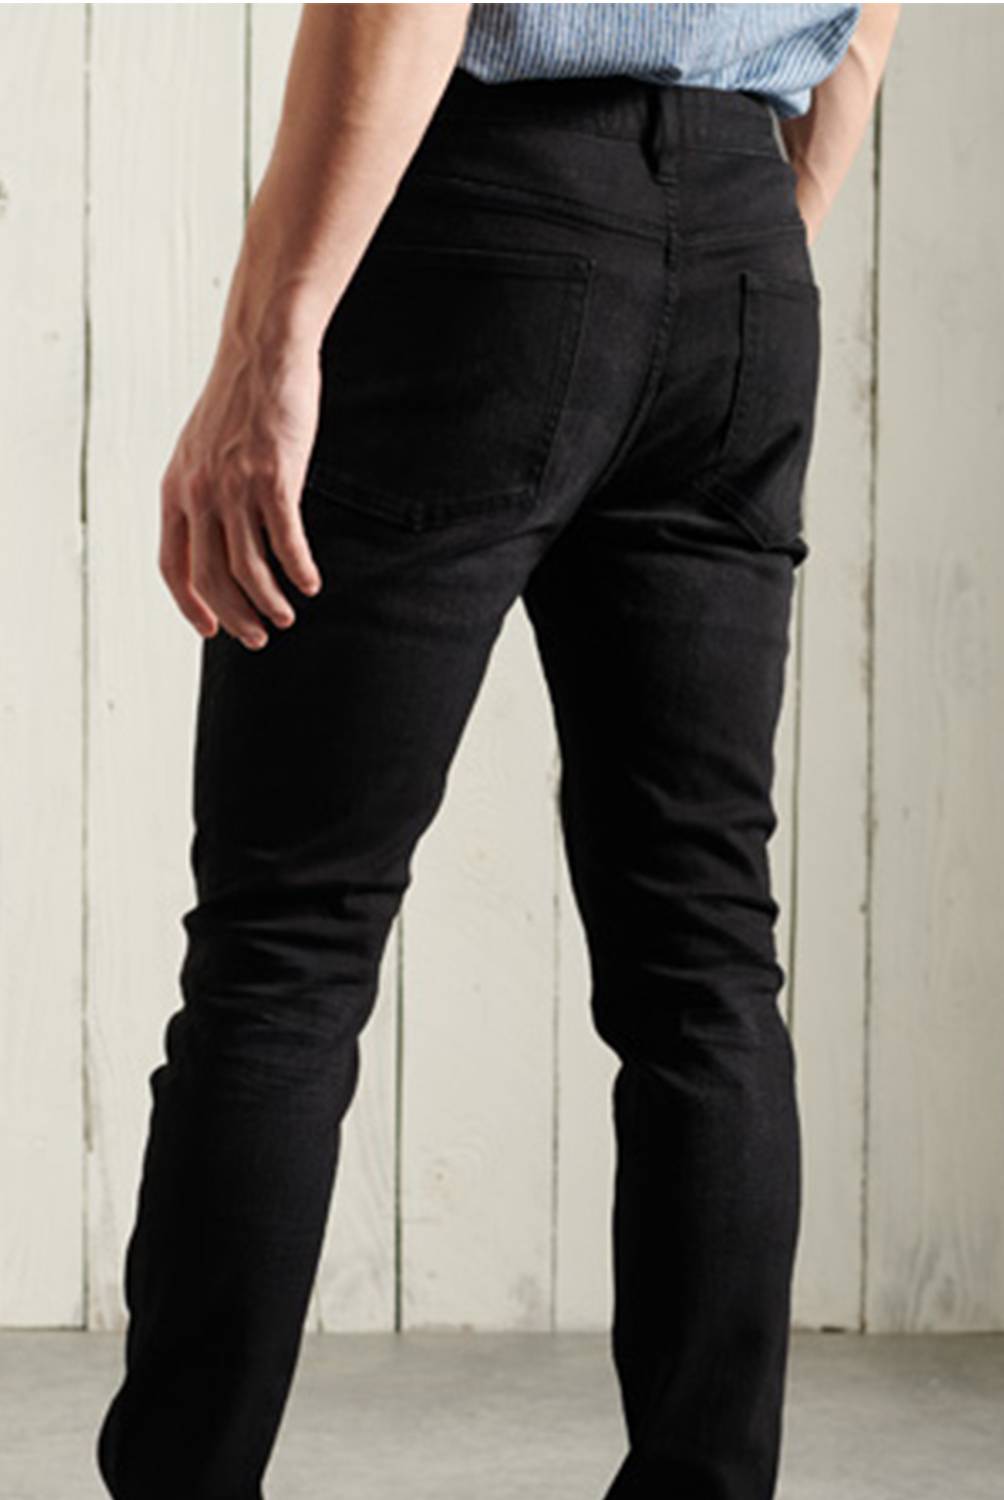 SUPERDRY - Jeans Skinny Recruit Grip 2.0 Hombre Superdry